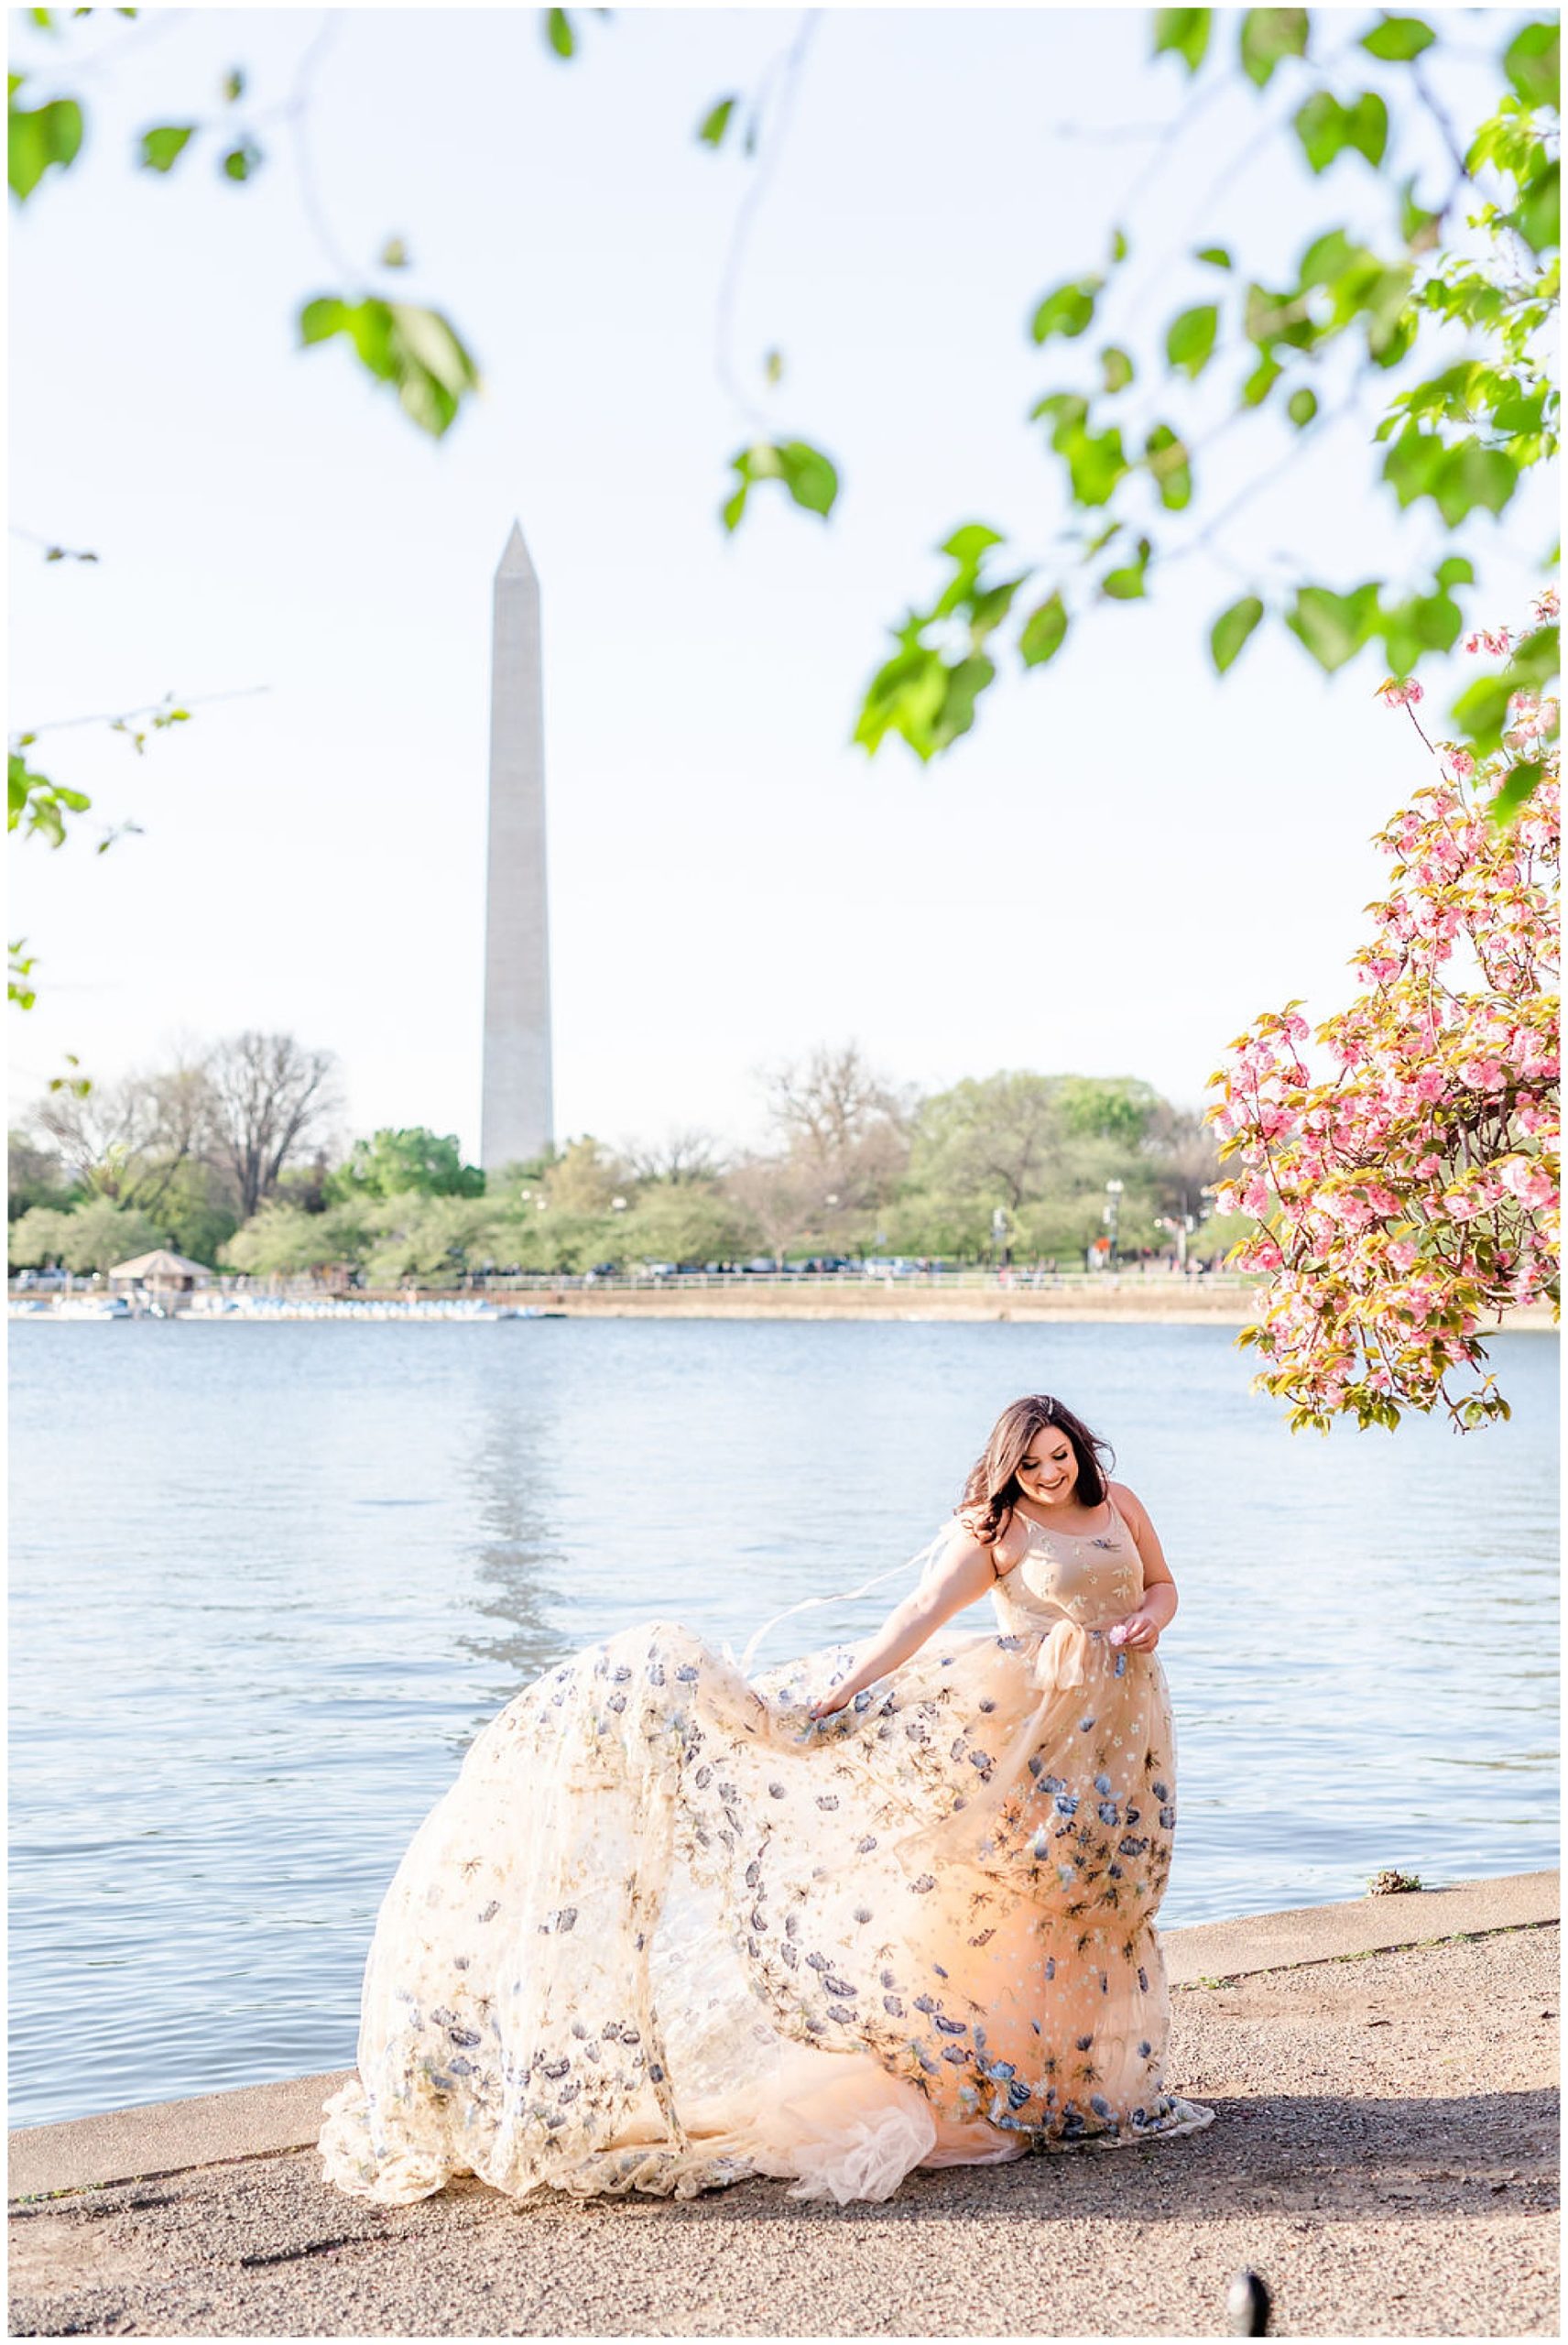 kwanzan cherry blossoms ballgown photos, cherry blossom portraits, kwanzan cherry blossom portraits, D.C. cherry blossoms, spring portriats, just because photos, just because portraits, cherry blossom headshots, Rachel E.H. Photography, woman in front of reflecting pool, dress flowing in wind, lace skirt flowing